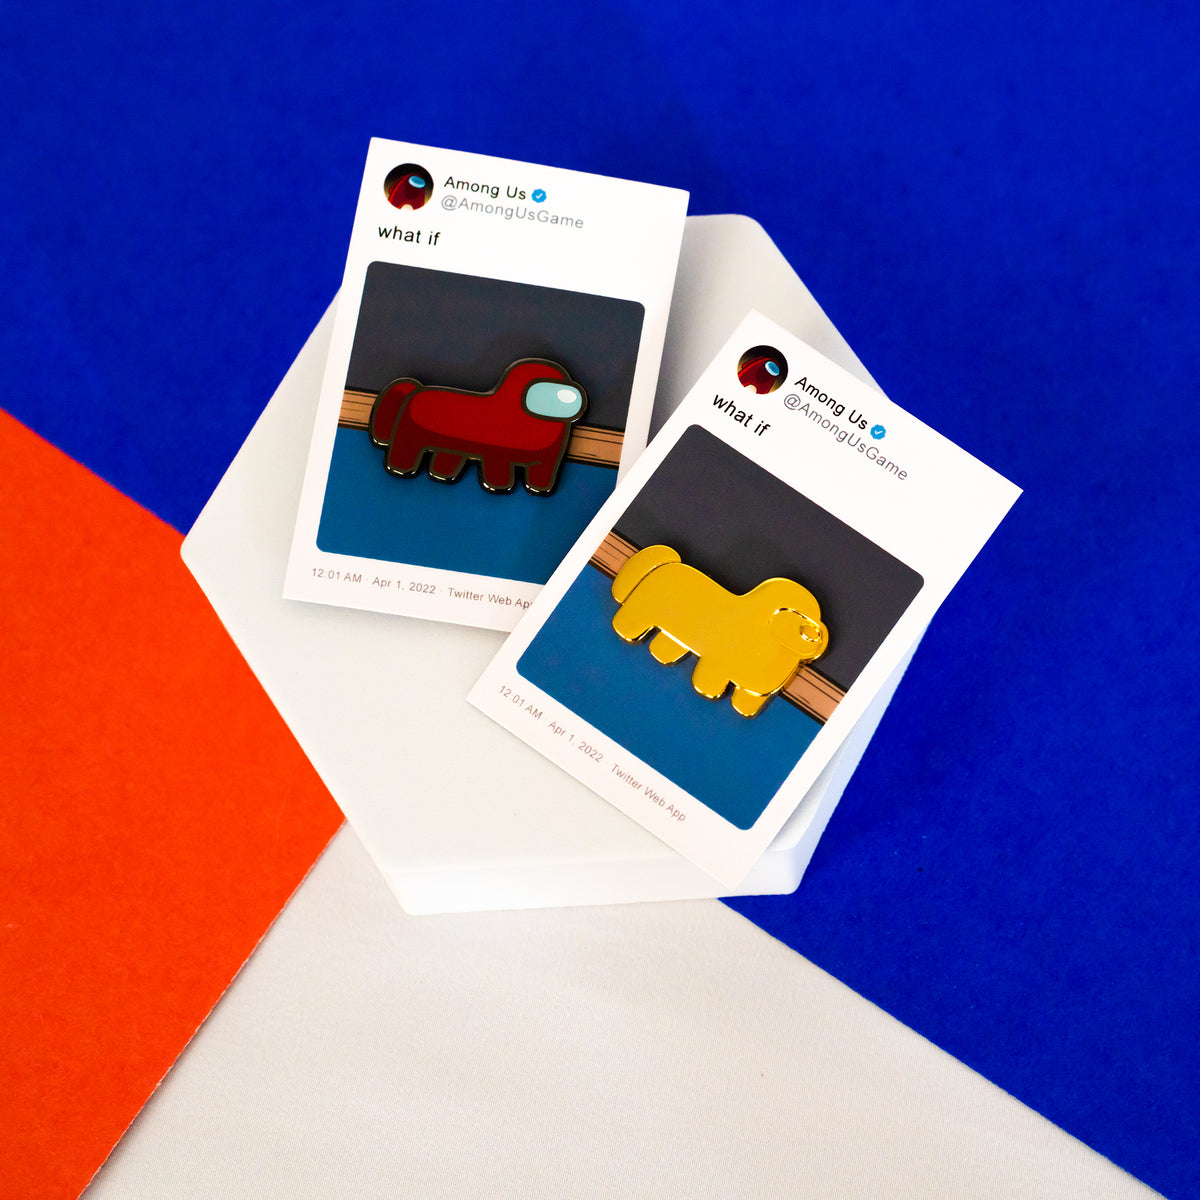 A red horsemate enamel pin and golden horsemate enamel pin on their respective backing cards are laying side by side on a colorful blue, red, and white surface.